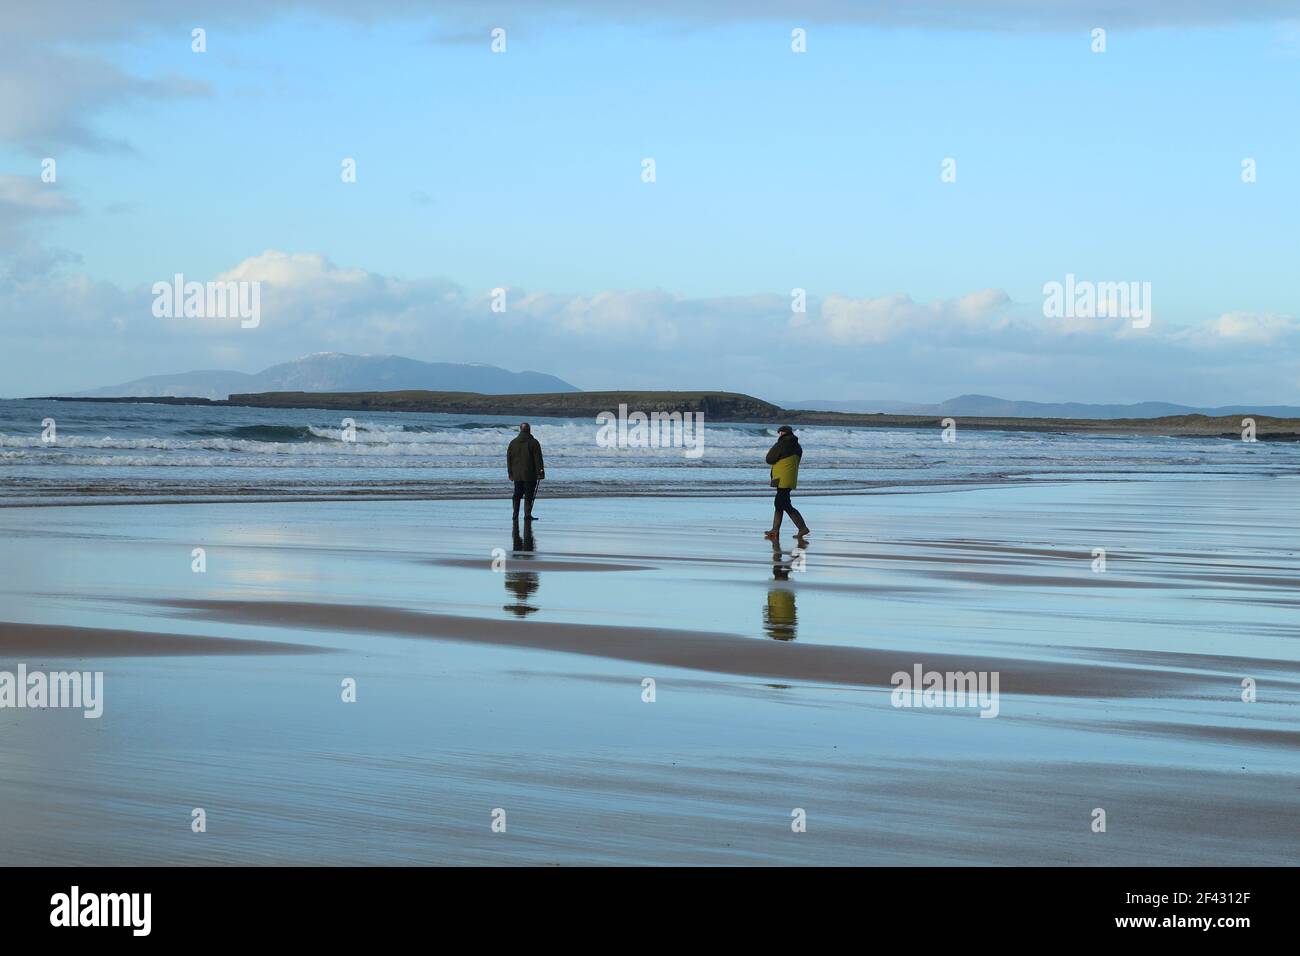 Two men on sea shore looking out on Atlantic Ocean, Ireland Stock Photo